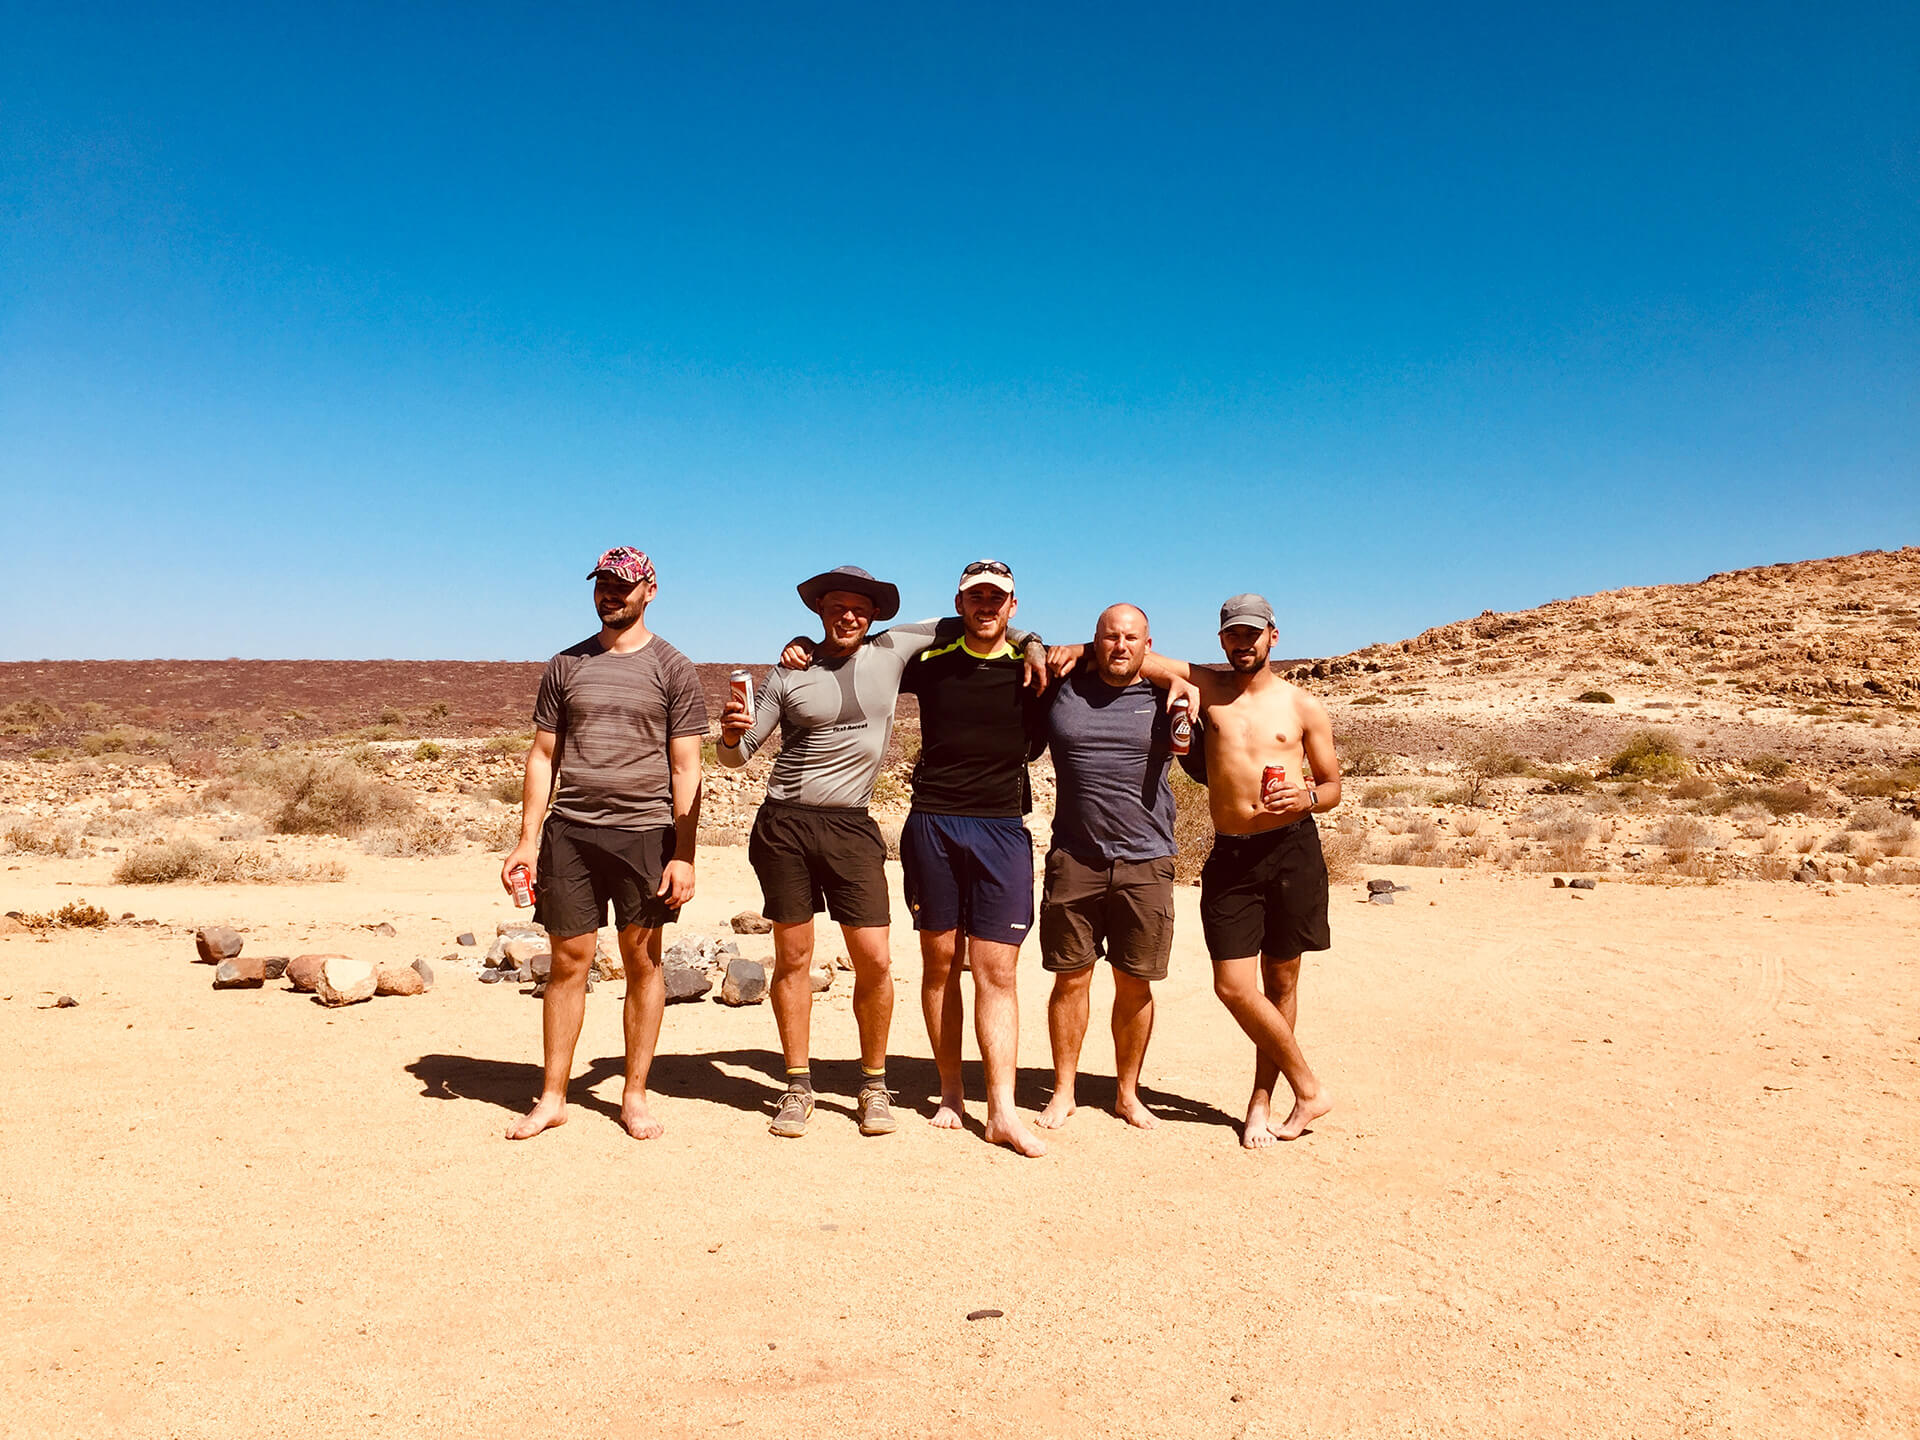 Landscape with Dudes at Namibia